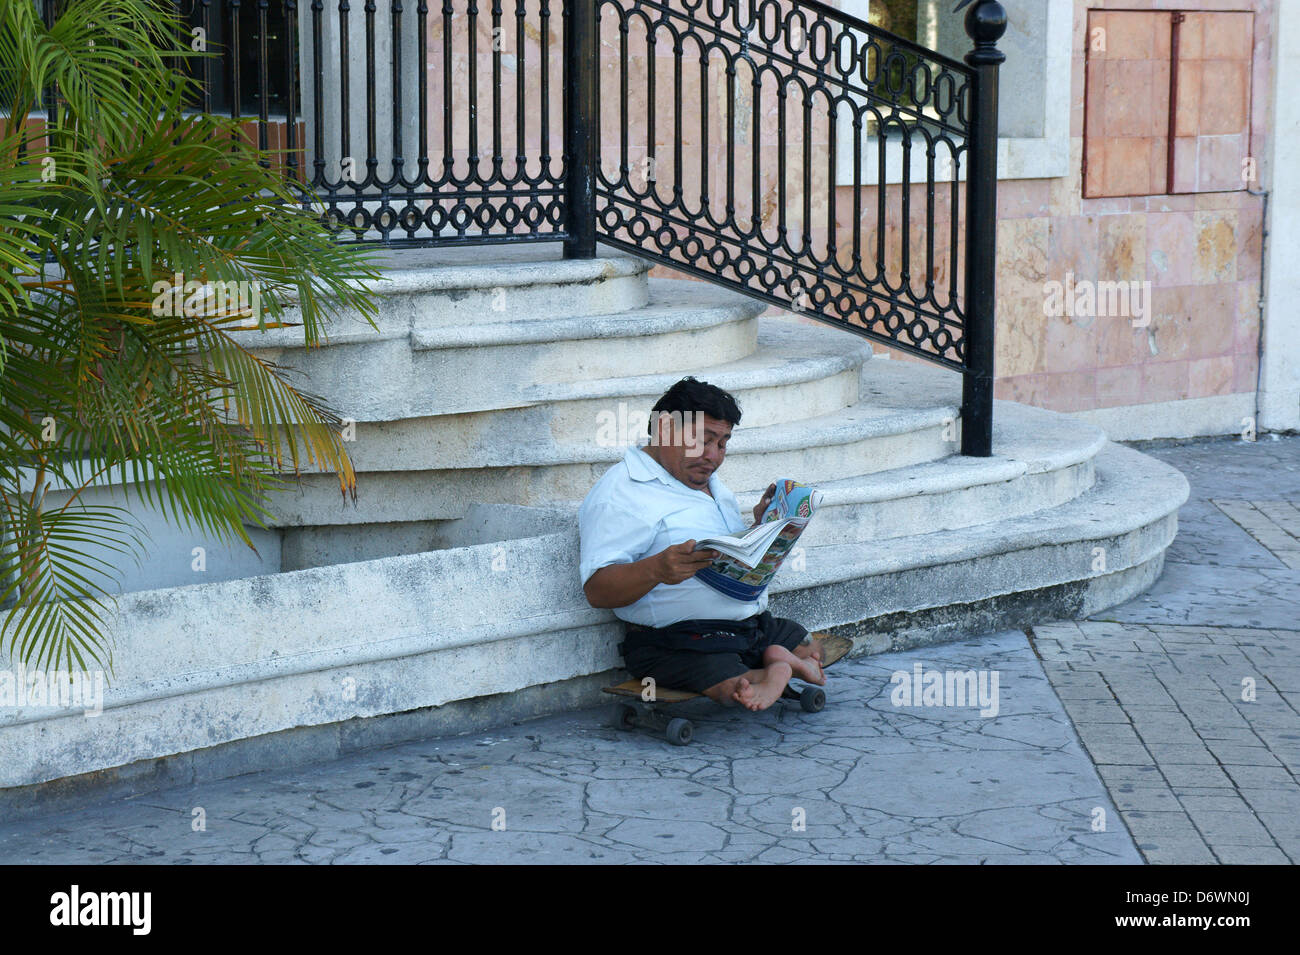 Handicapped man sitting on a skateboard and reading a newspaper, Cancun, Quintana Roo, Mexico Stock Photo